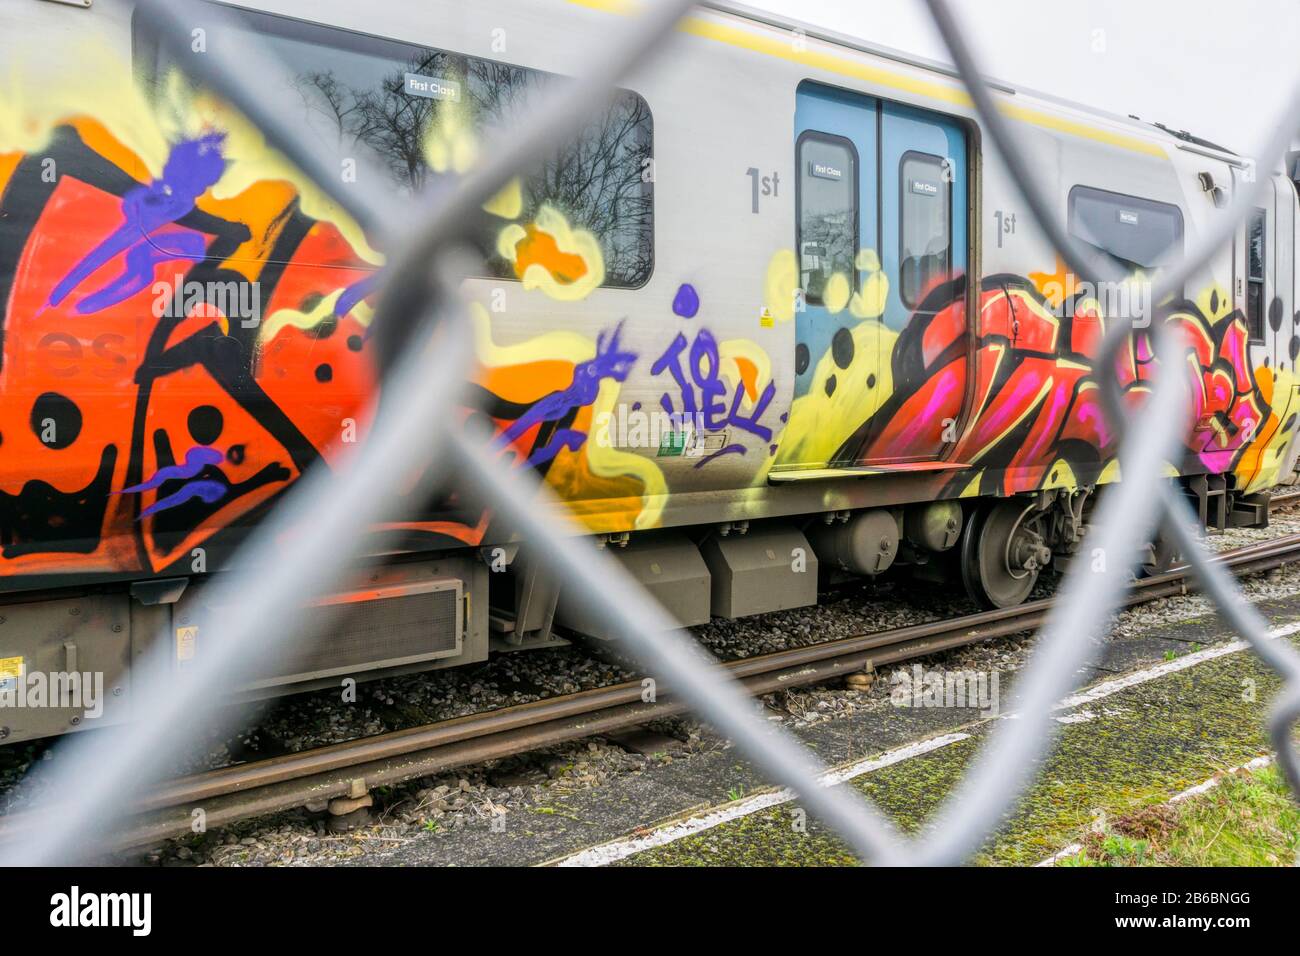 Graffiti on railway carriage seen though chain link fence. Stock Photo